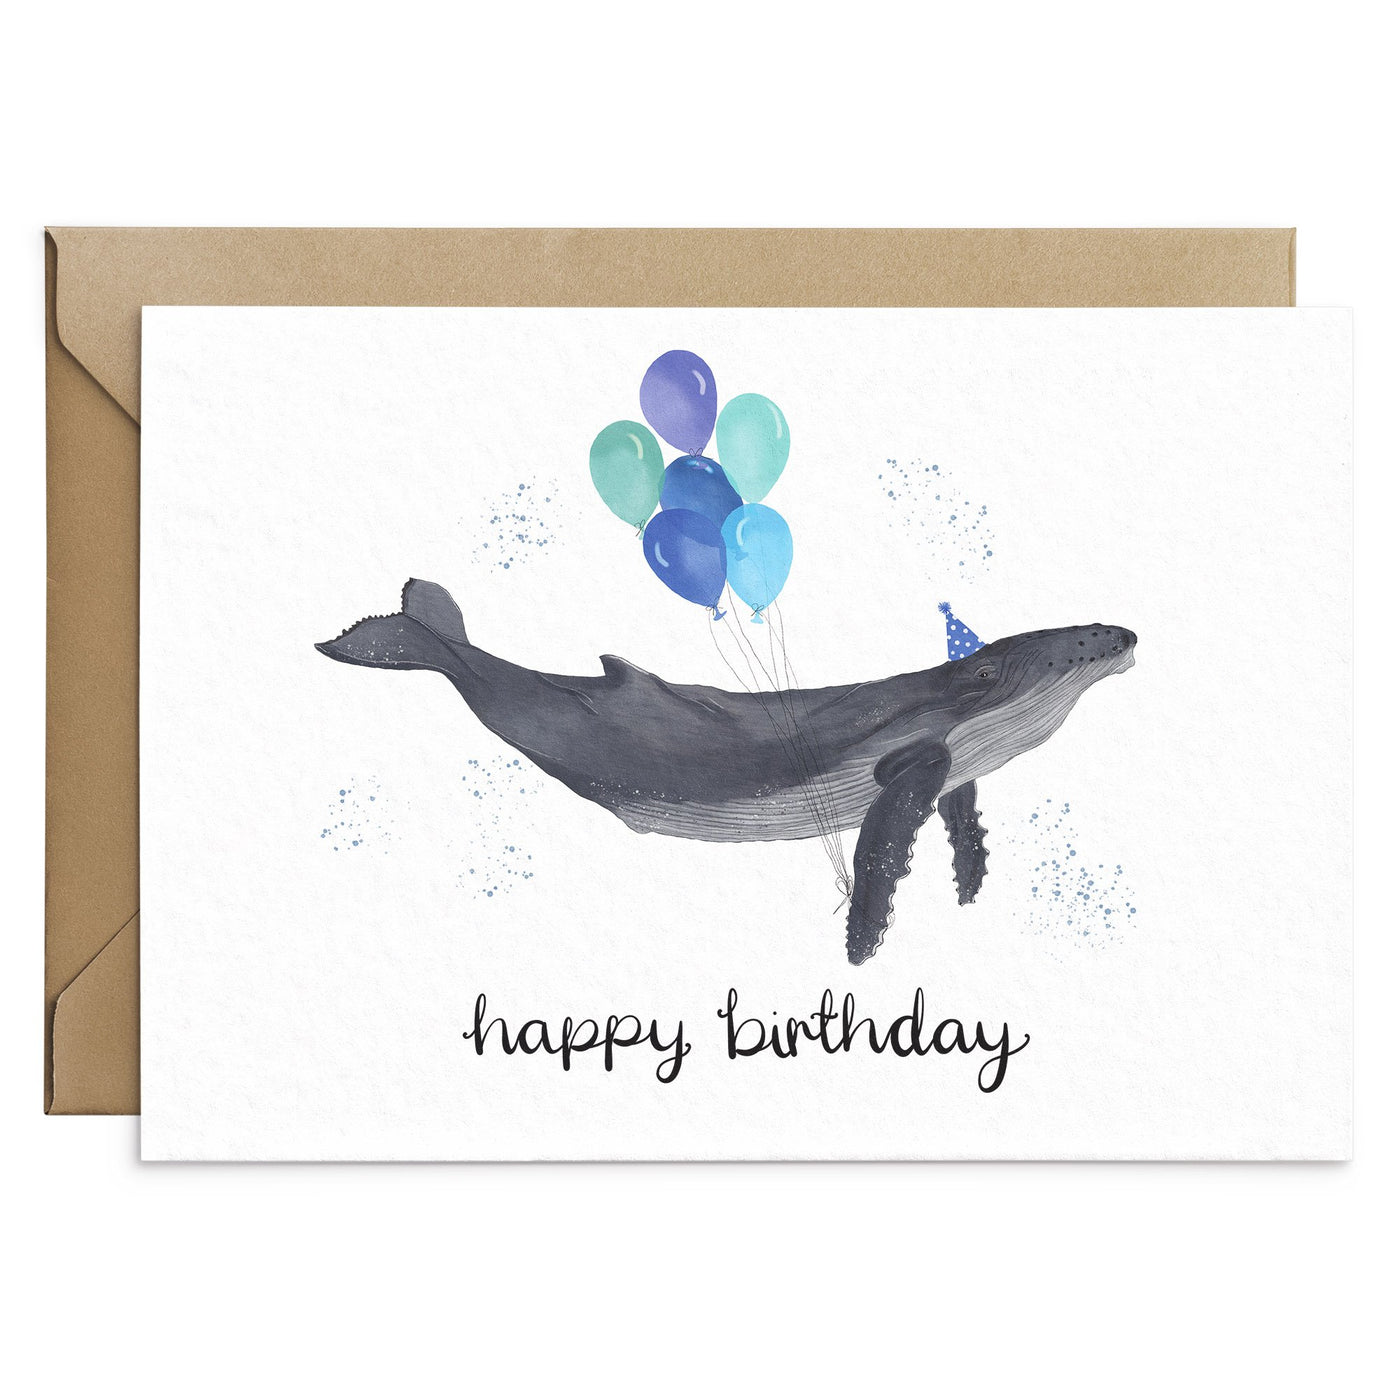 Humpback Whale Birthday Card - Poppins & Co.